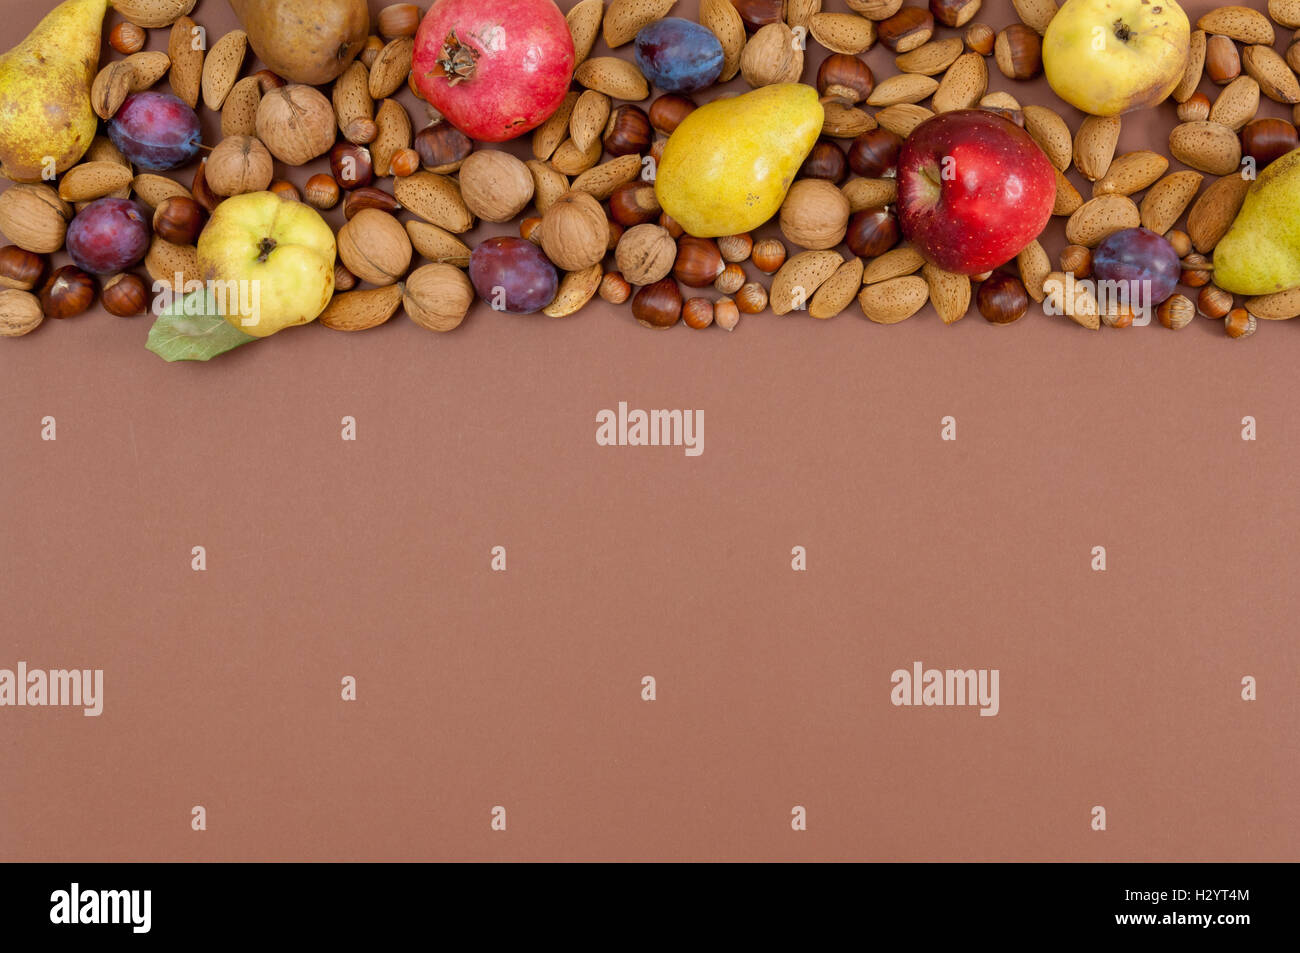 Autumn fruits and nuts on brown background Stock Photo